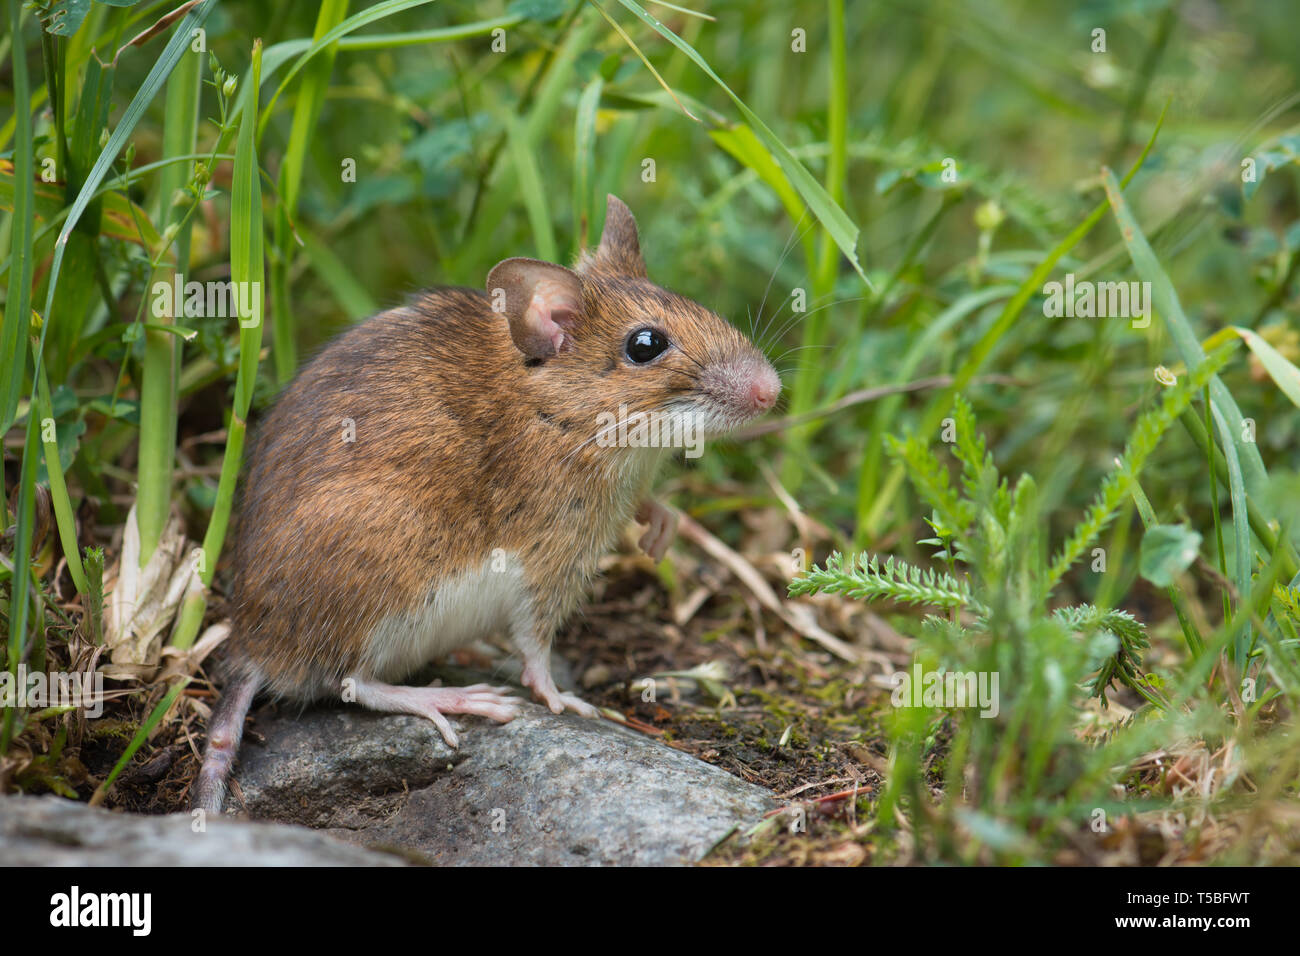 Mouse comes out of its ground burrow Stock Photo